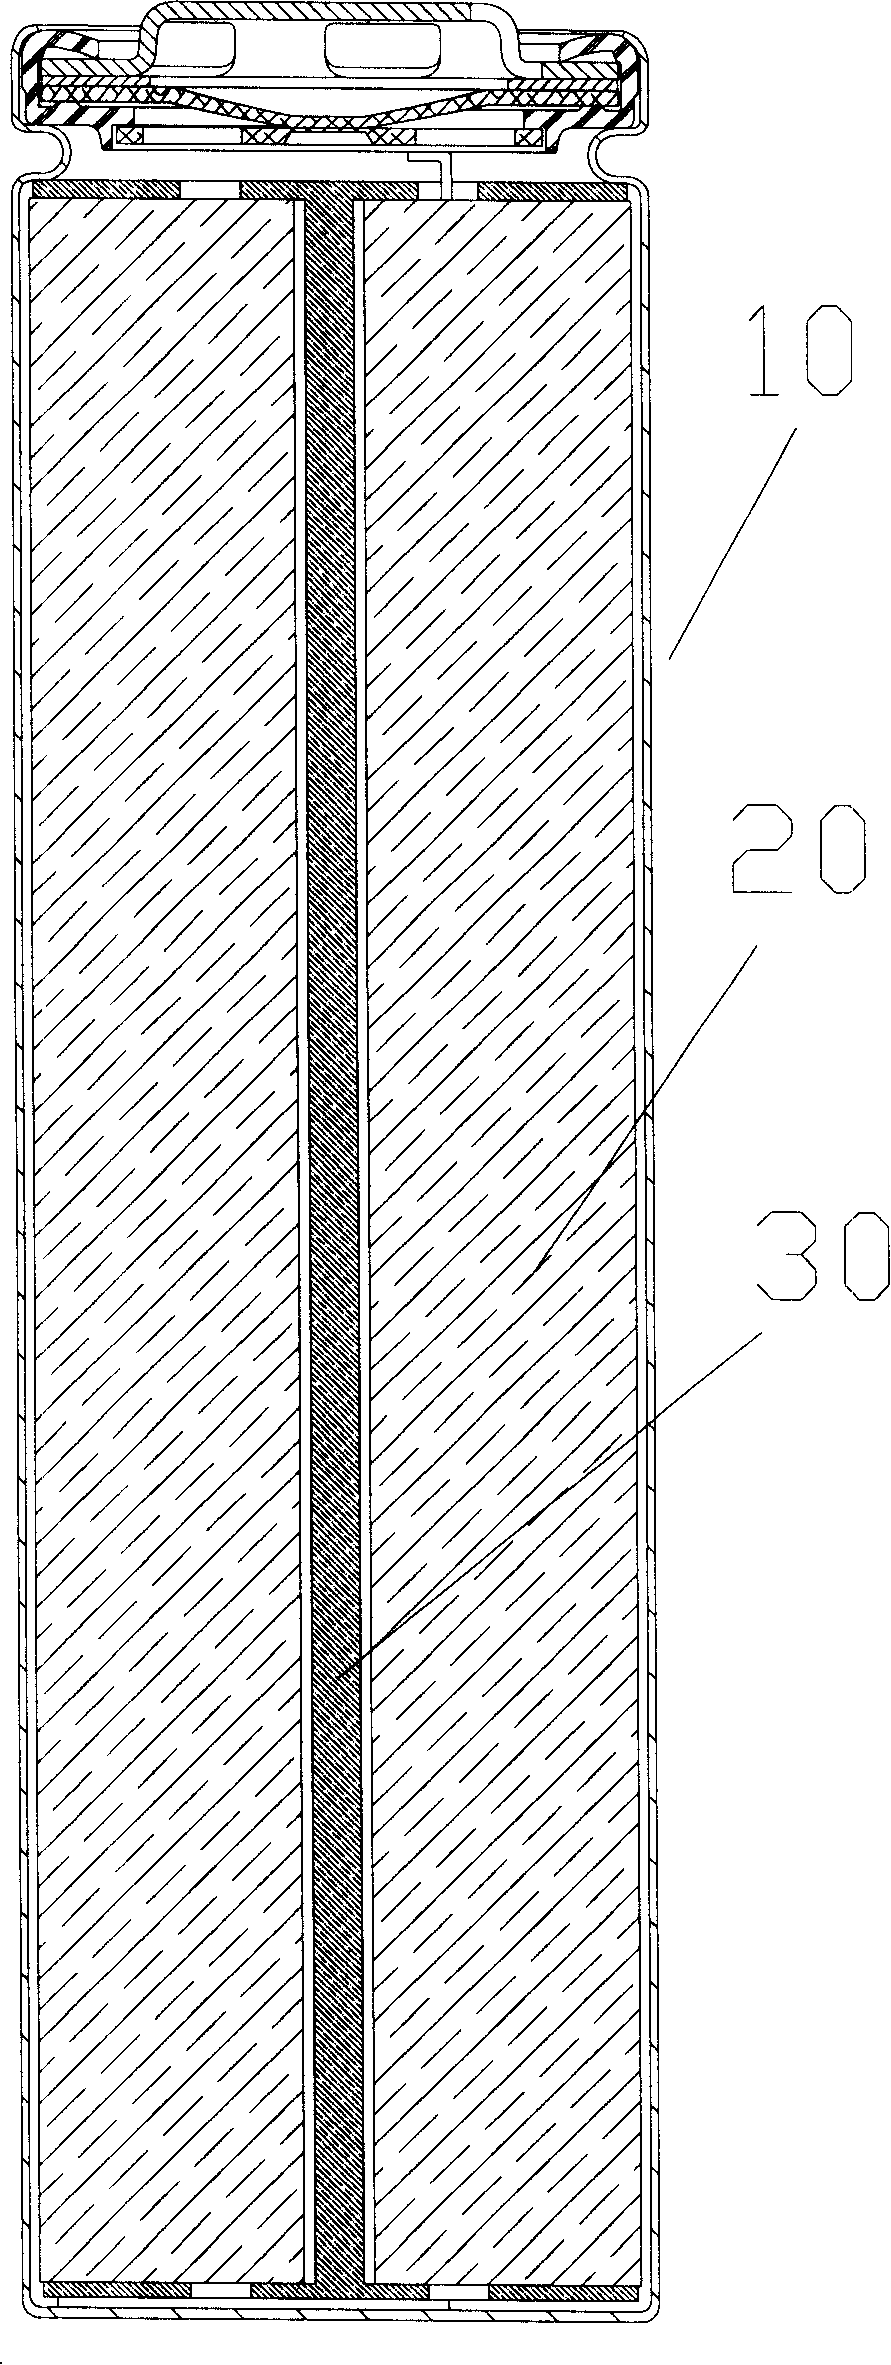 Li-ion secondary battery and its making method